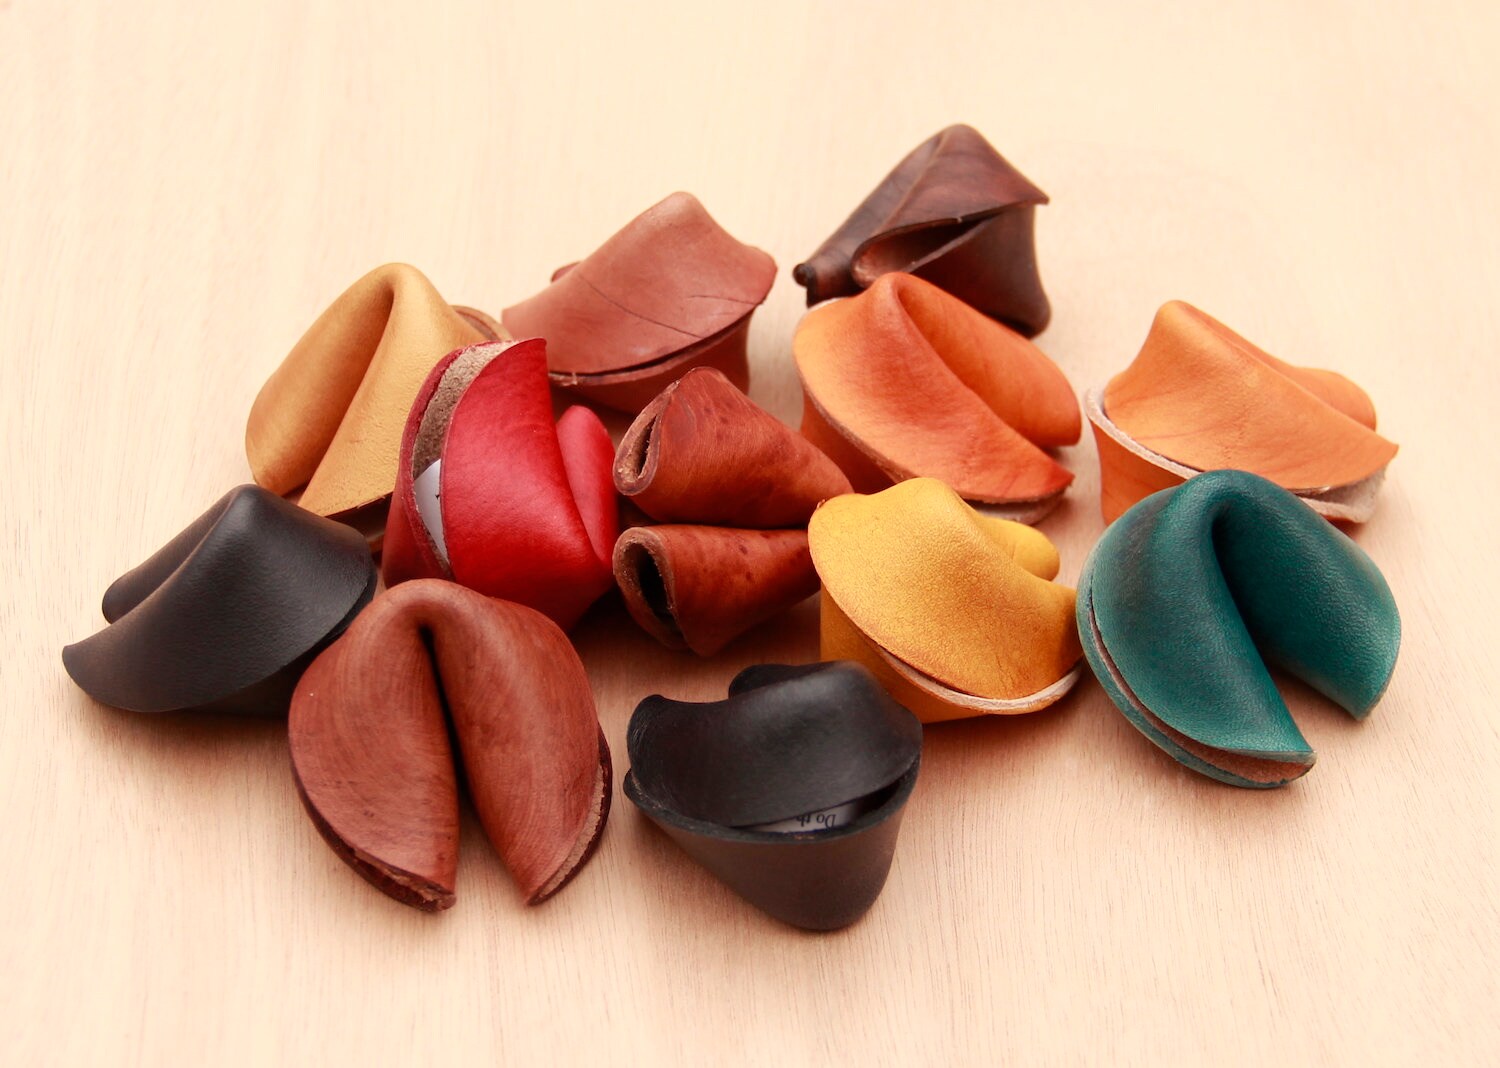 Fortune Cookie Other Leathers - Wallets and Small Leather Goods